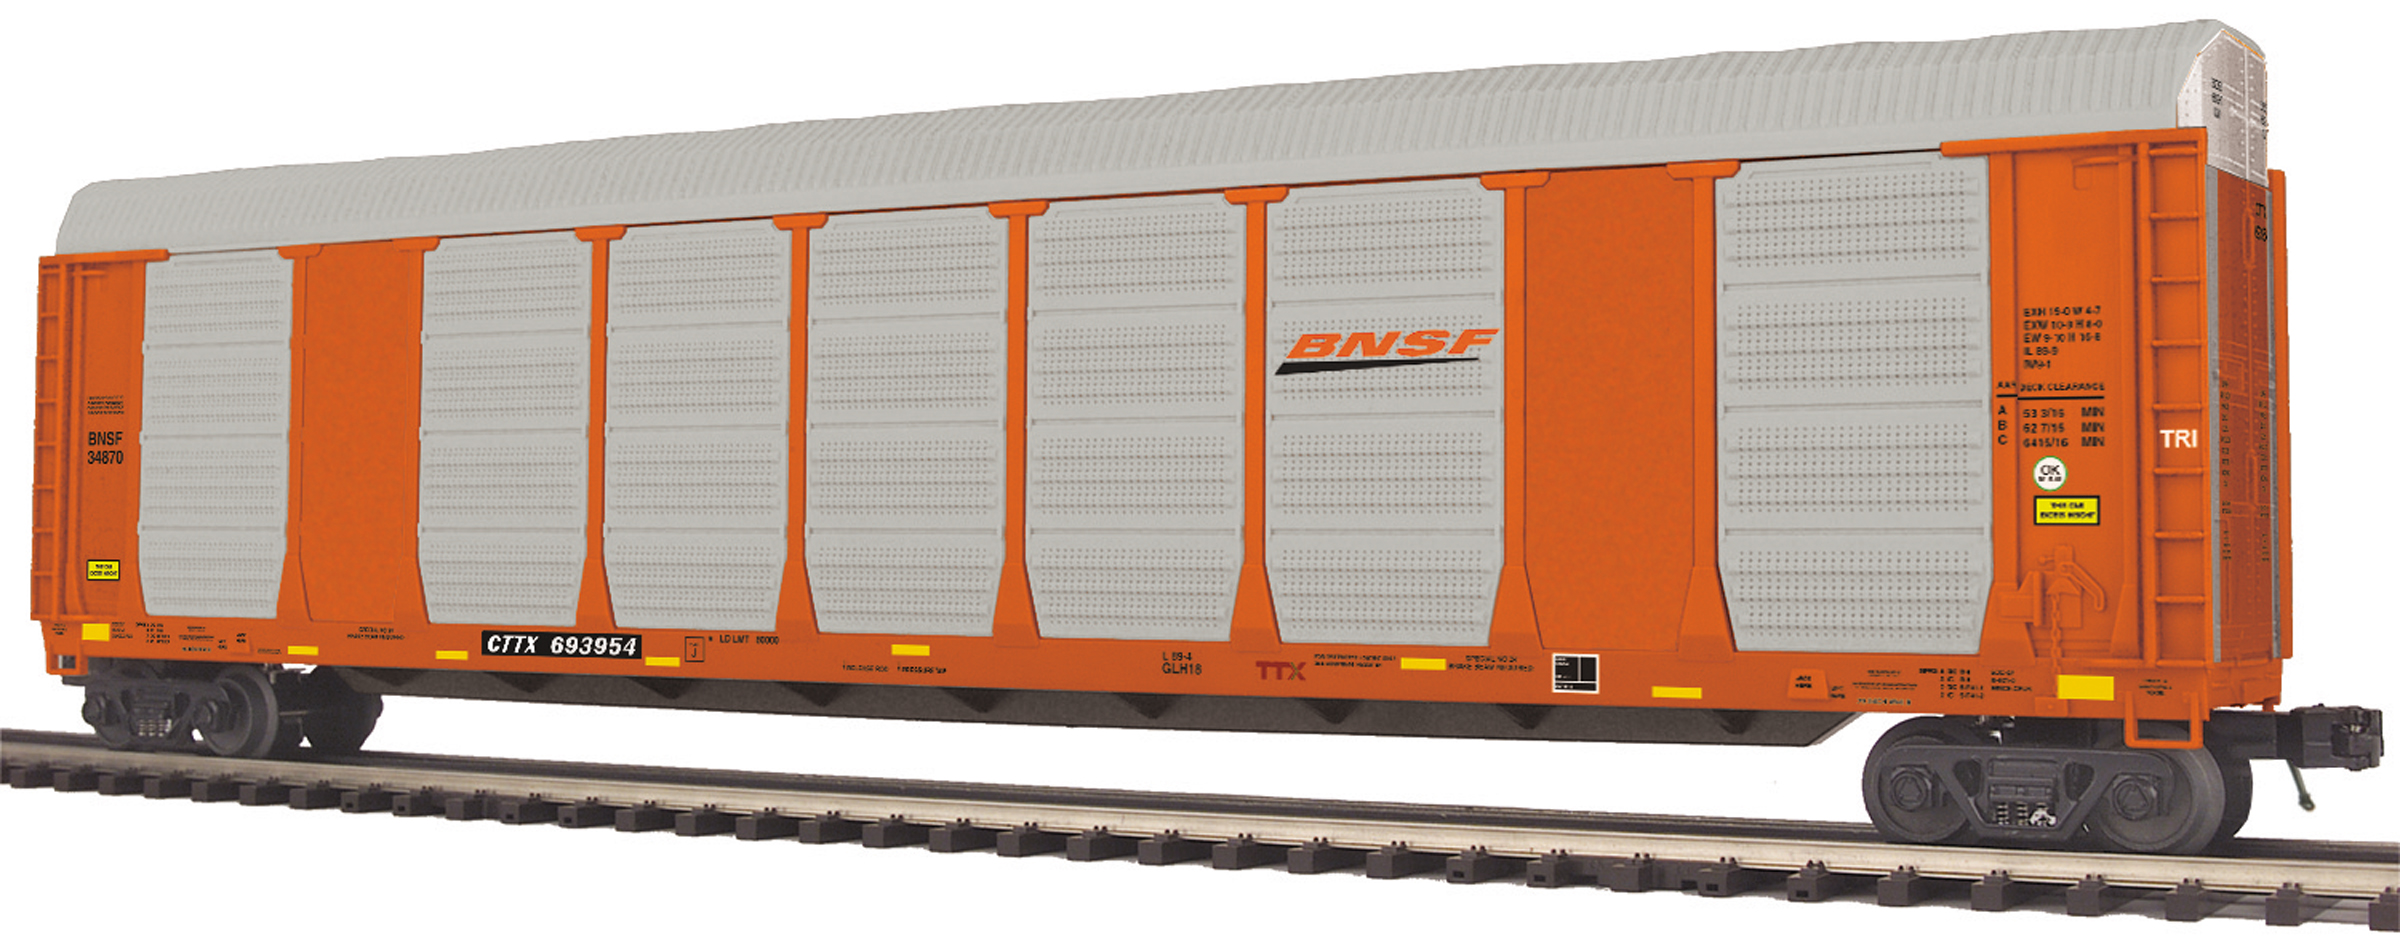 BNSF Corrugated Auto Carrier image